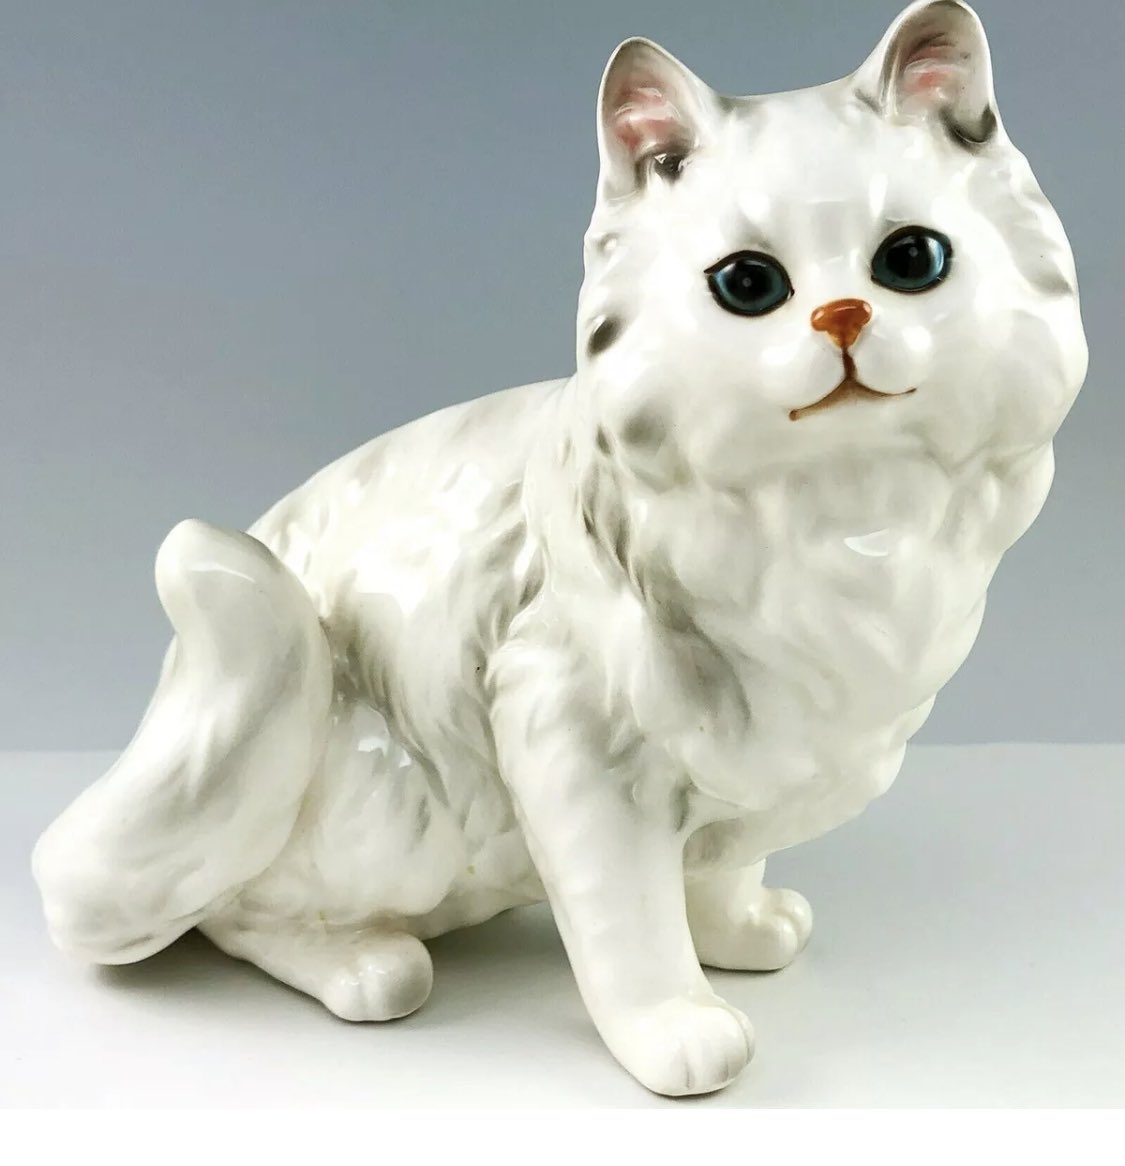 This “cat” is a dog. You can’t just throw dog energy on a cat sculpture and think no one will notice...